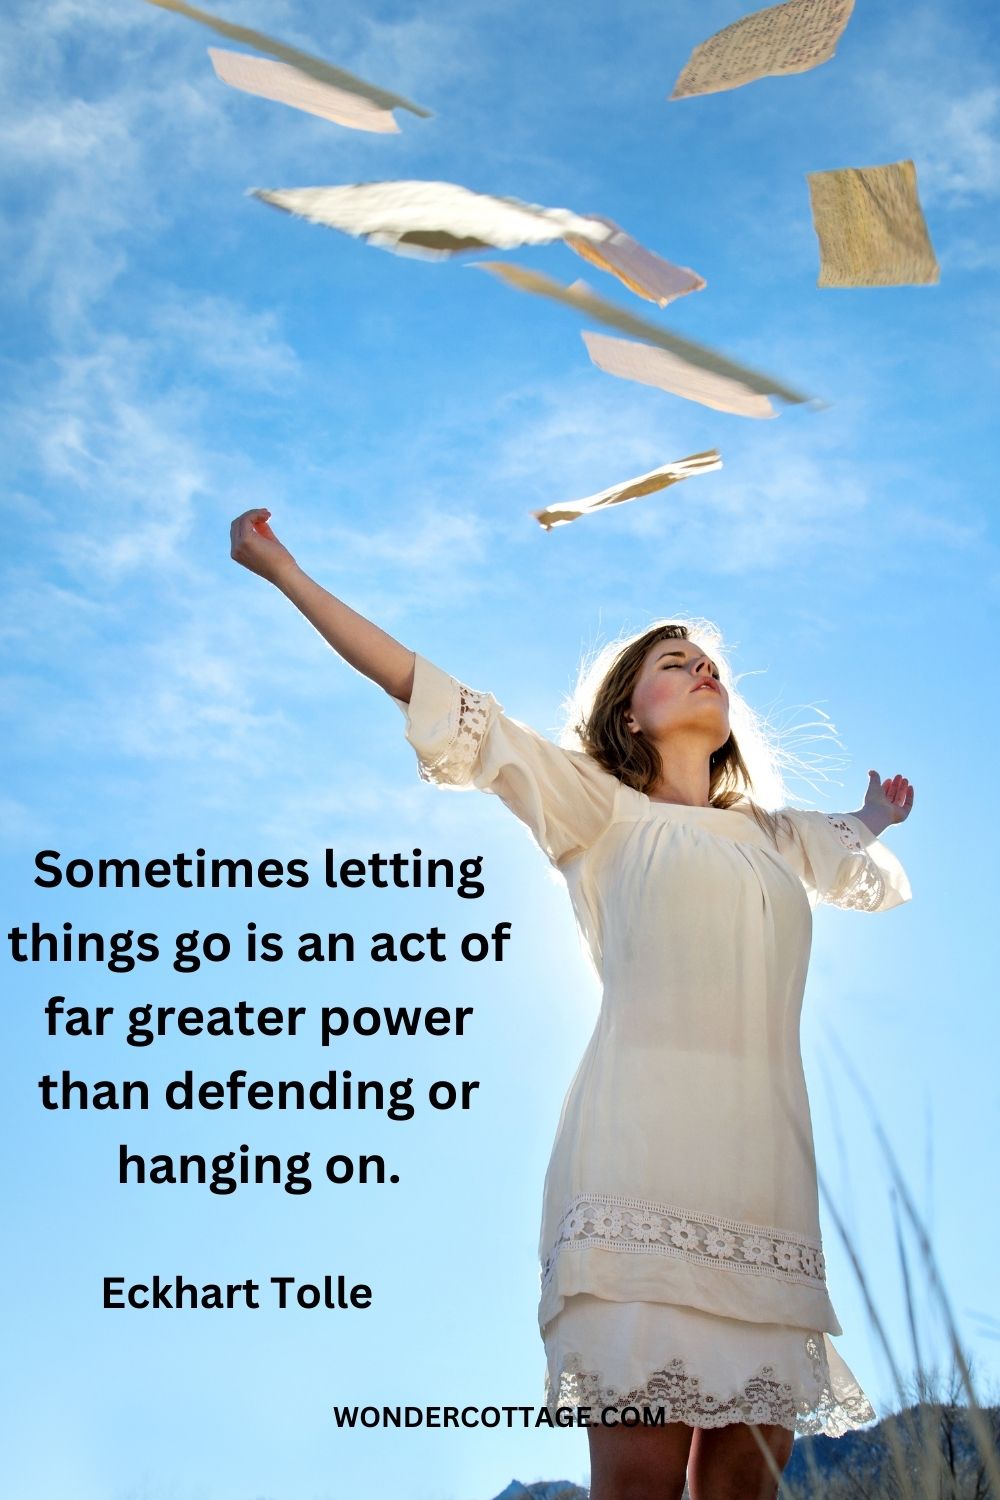 Sometimes letting things go is an act of far greater power than defending or hanging on. Eckhart Tolle